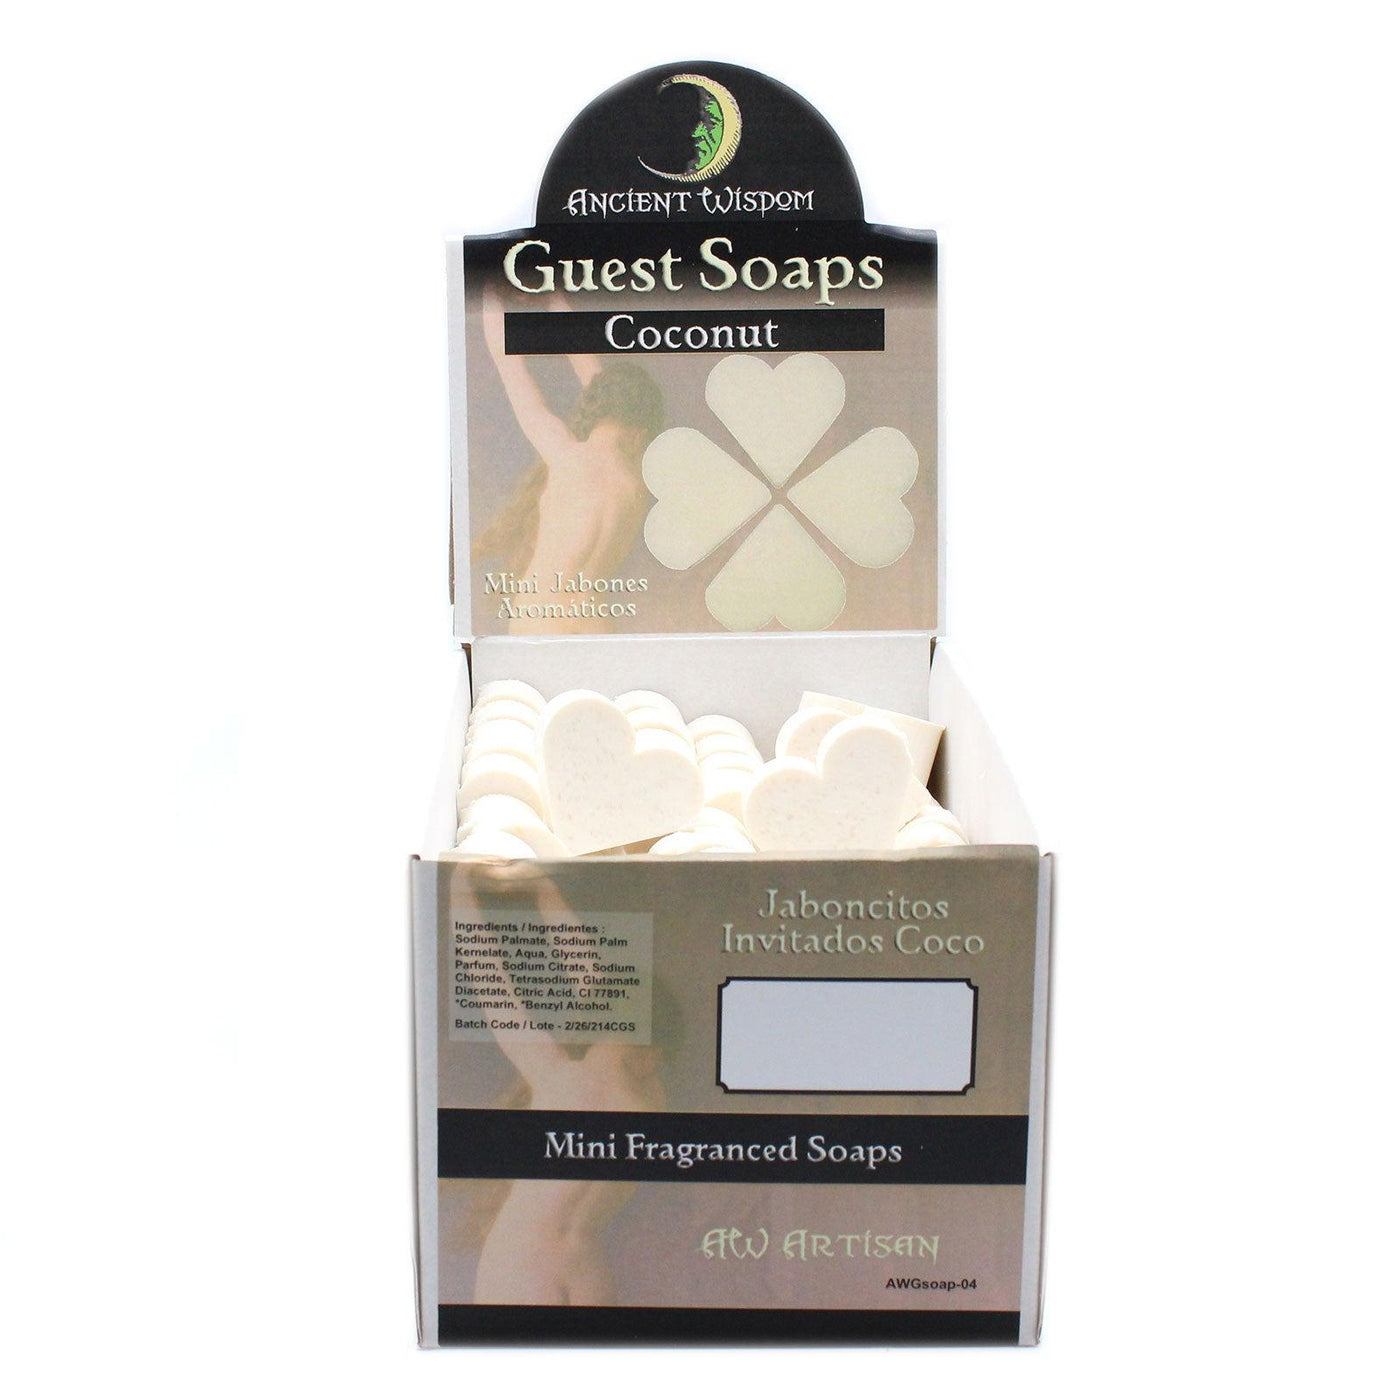 10x Green Heart Shaped Paraben Free Guest Soap - Coconut.